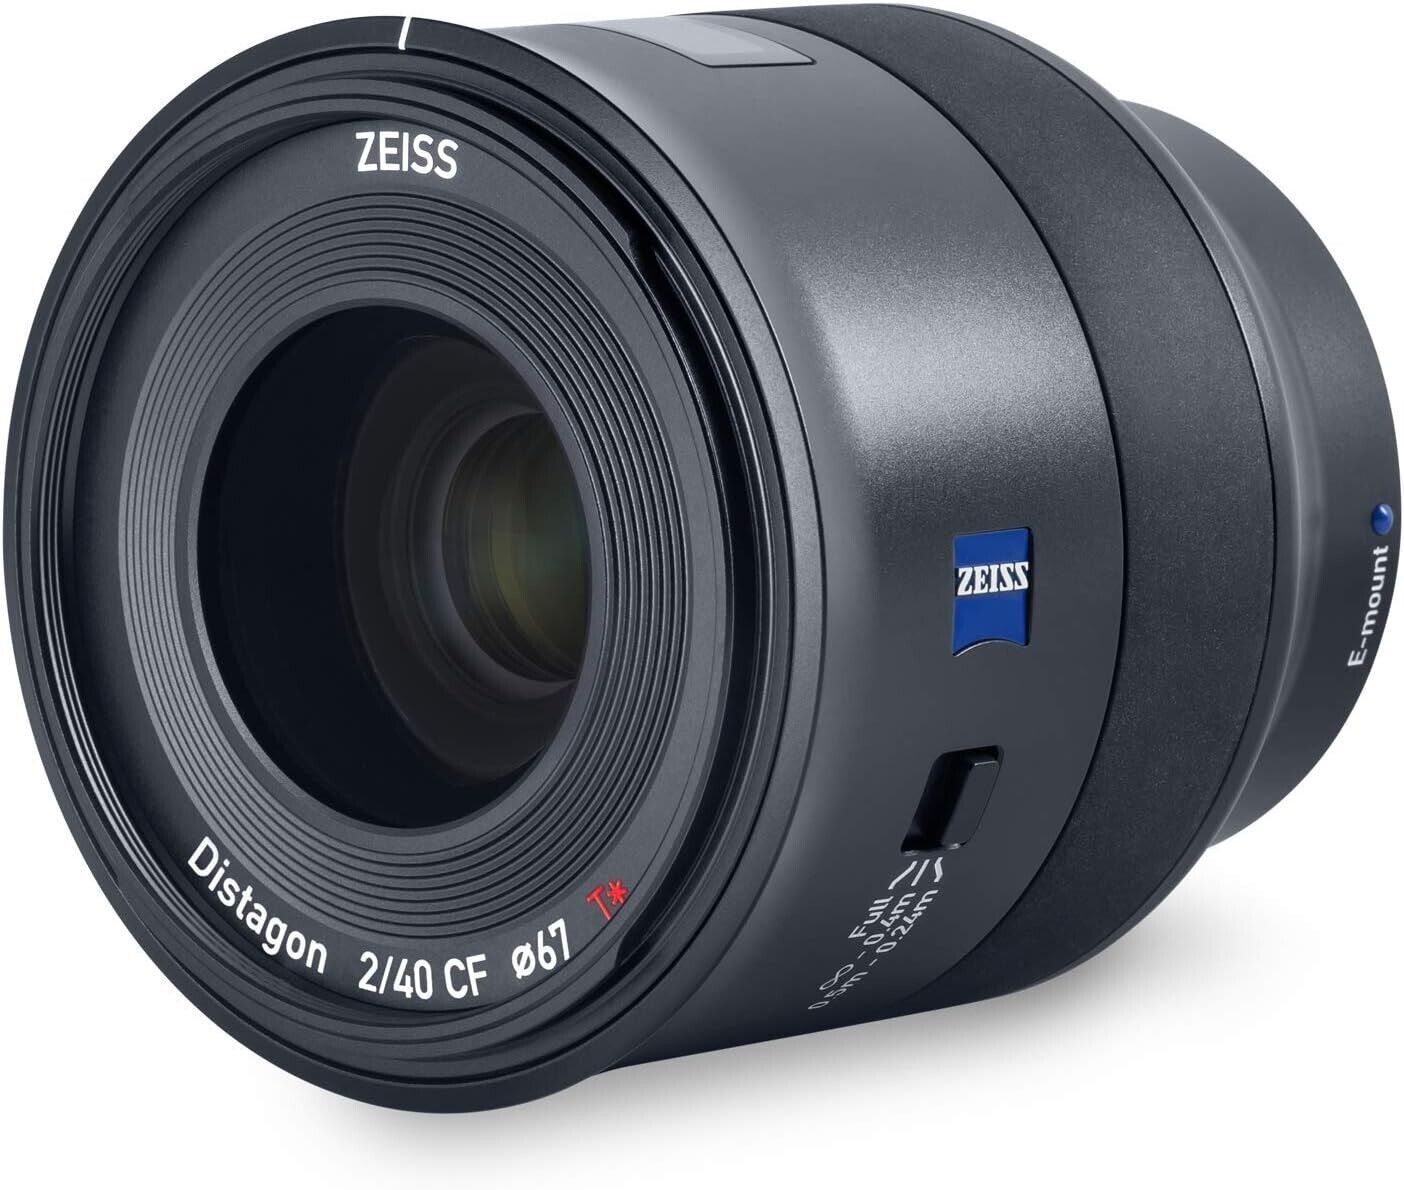 ZEISS Batis 2/40 CF Lens for Sony Mirrorless Camera for sale 